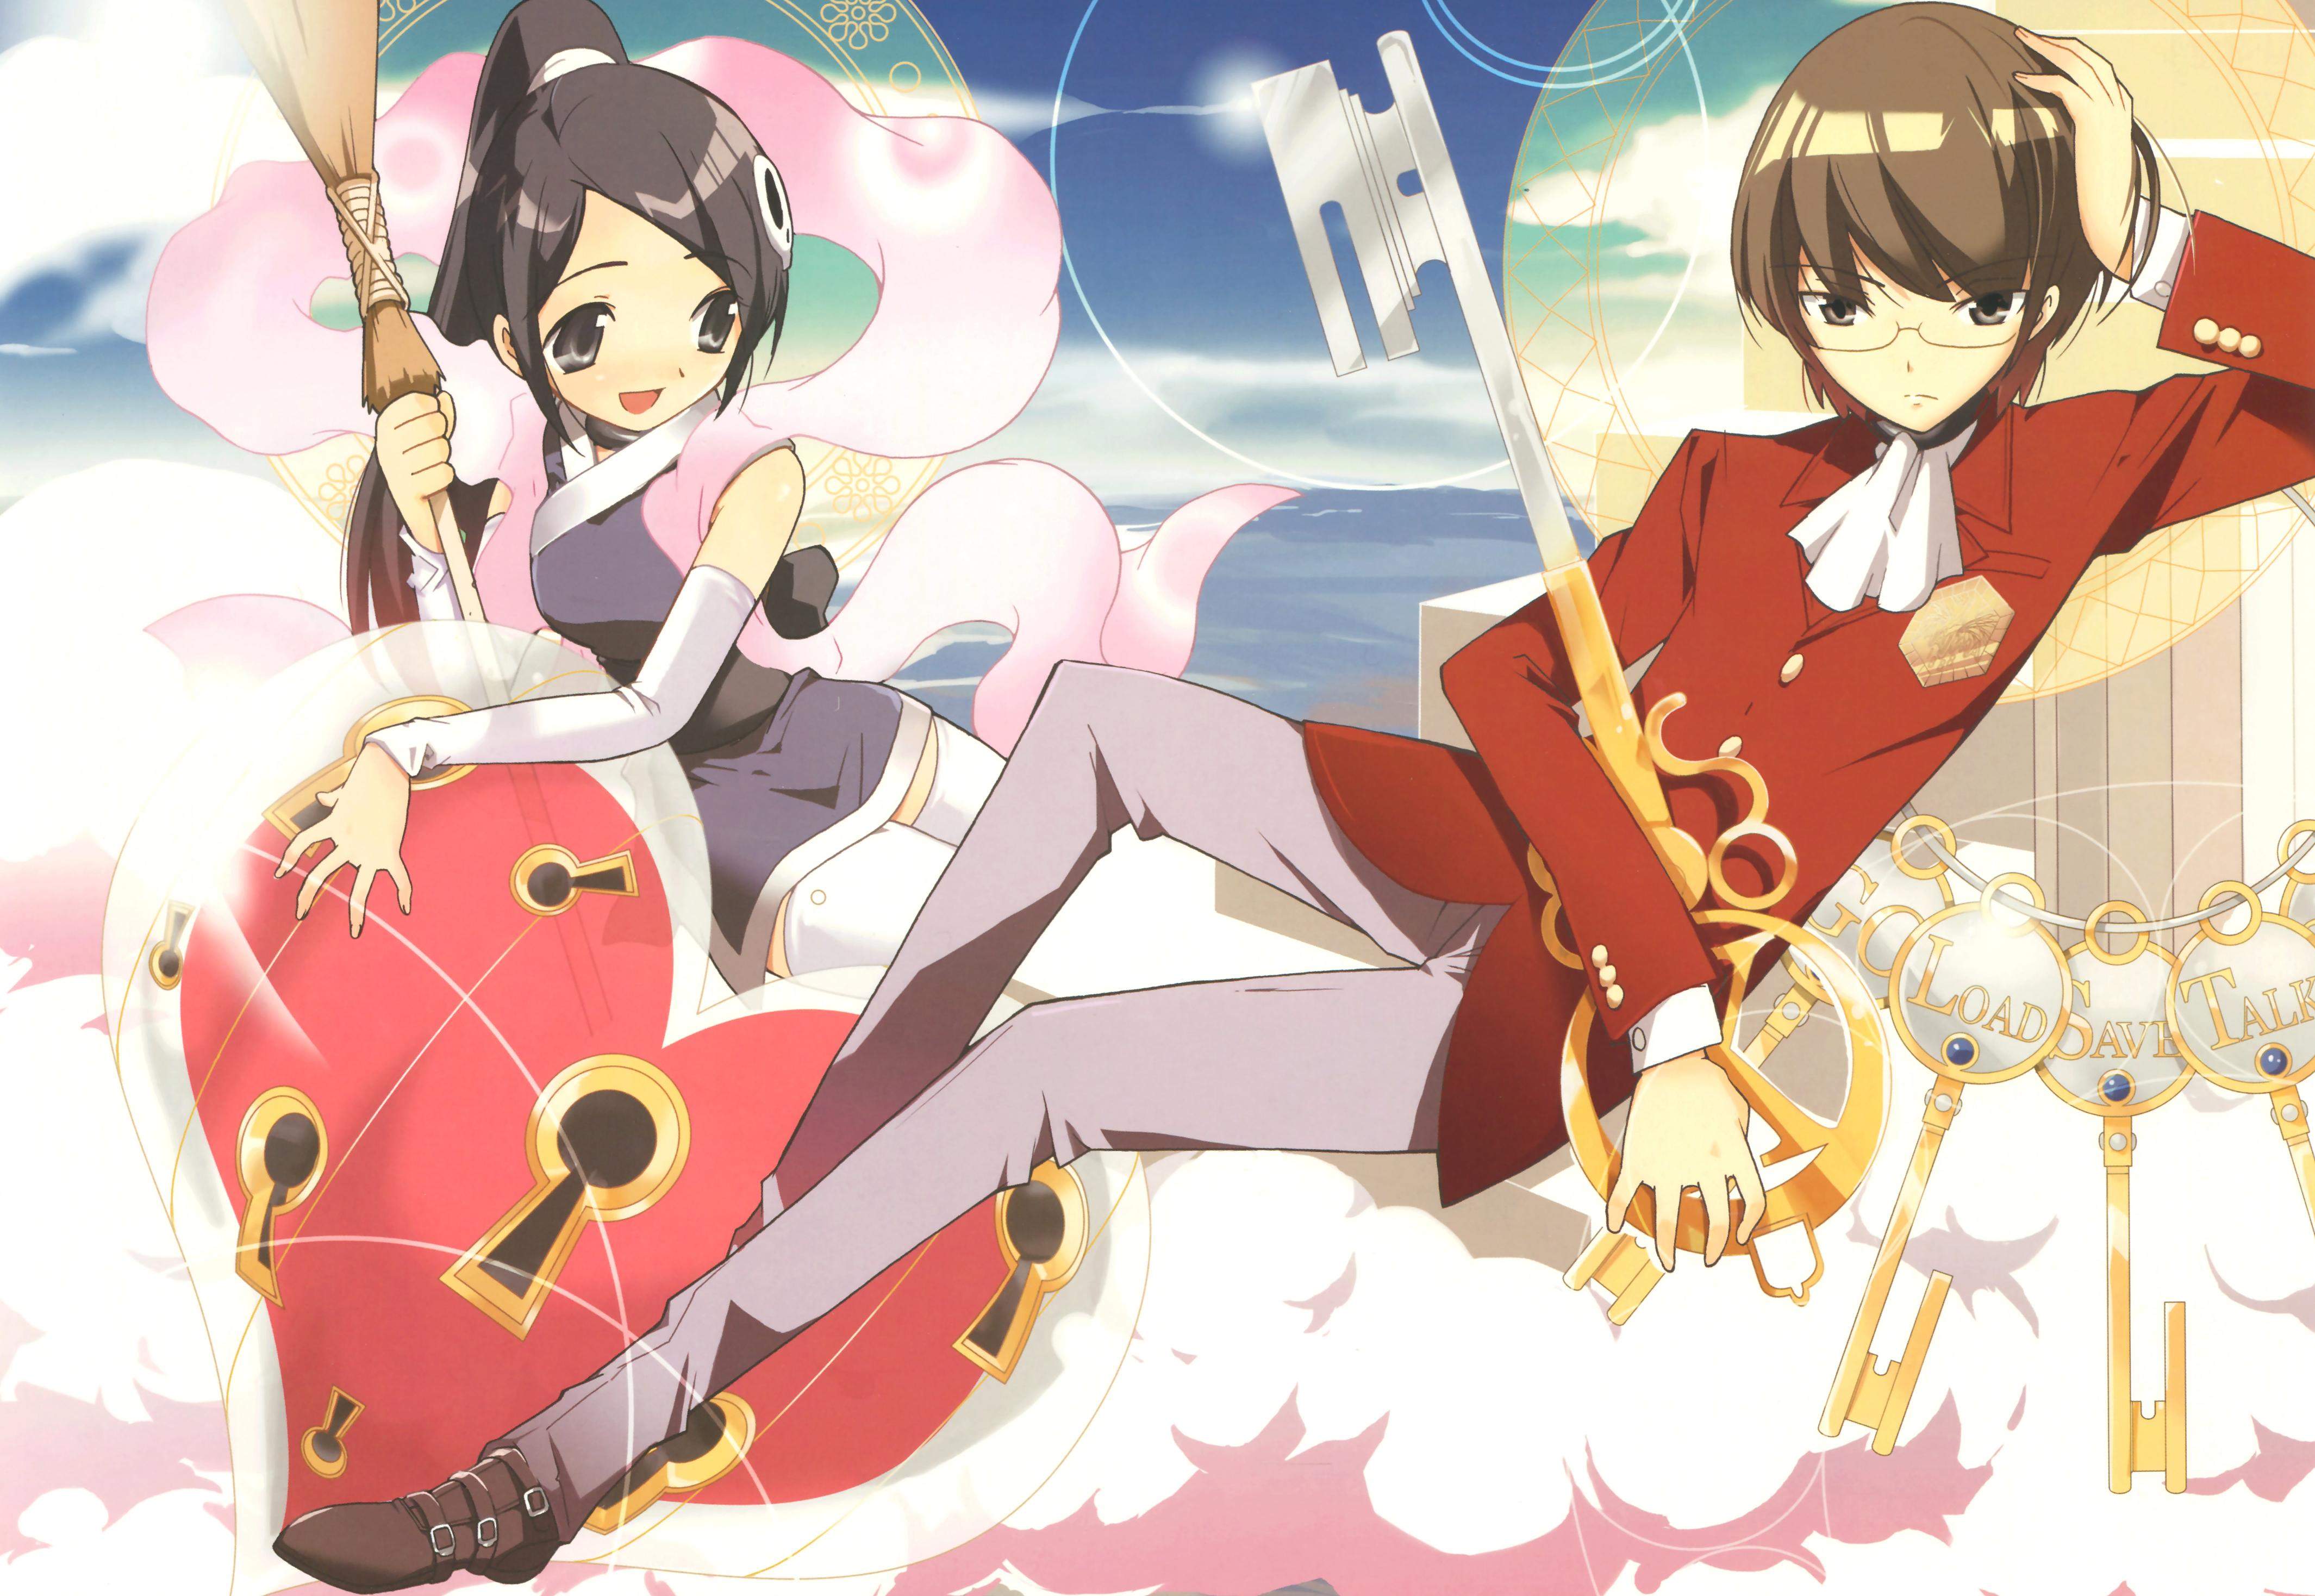 The World God Only Knows Backgrounds, Compatible - PC, Mobile, Gadgets| 4259x2936 px